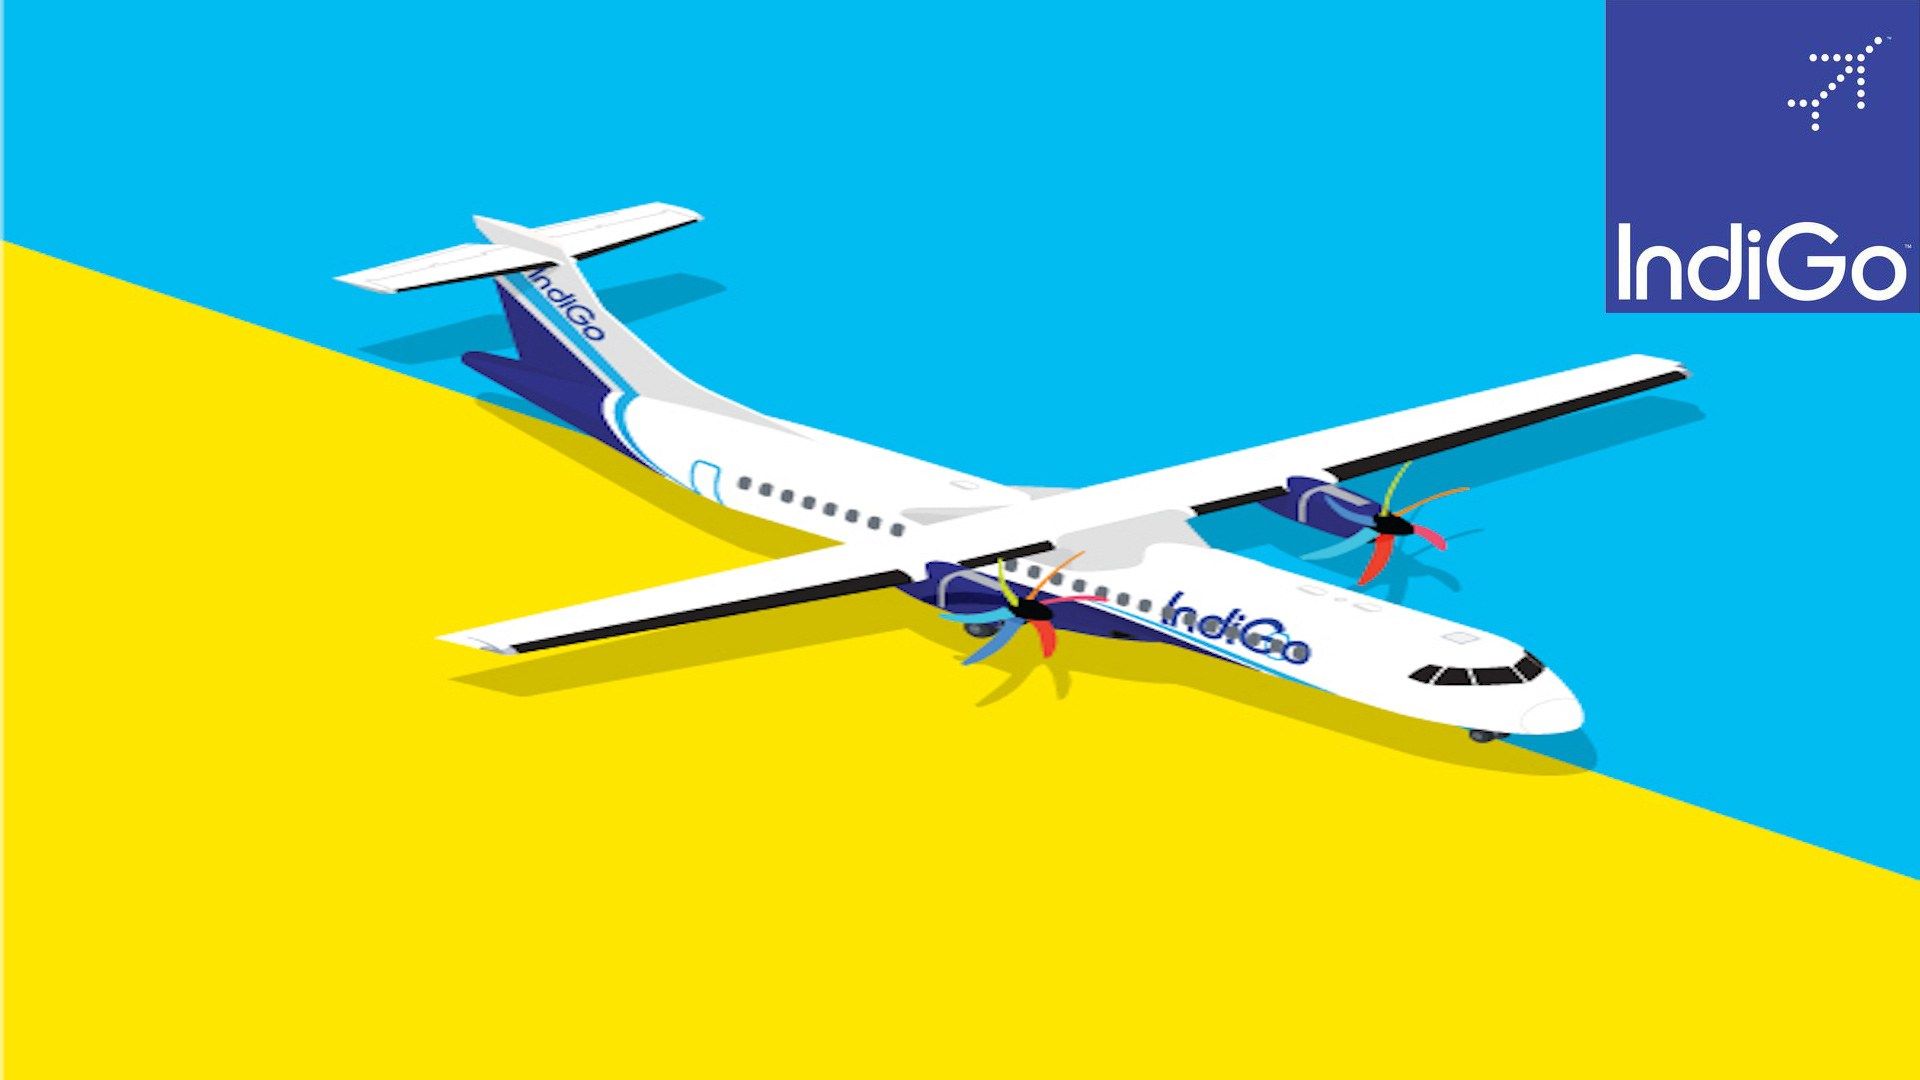 IndiGo is introducing new ATR flights on its existing network